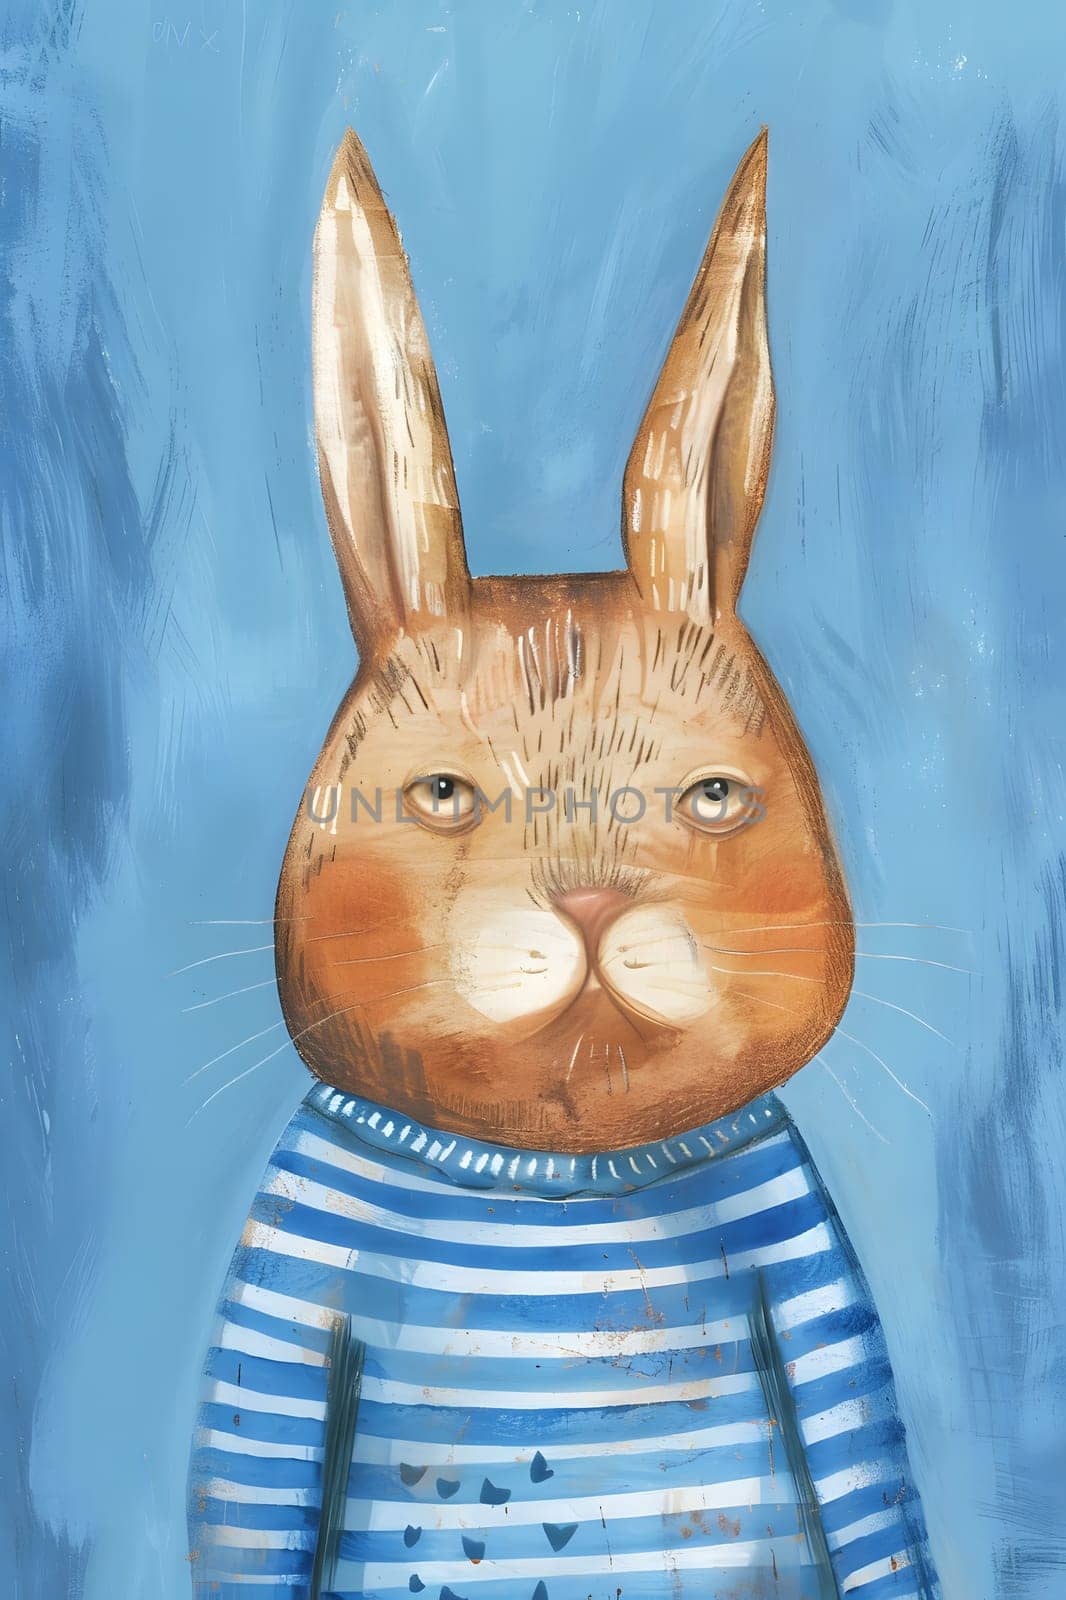 A charming painting of a rabbit in an electric blue and white striped shirt, showcasing the artists skill in capturing the essence of Rabbits and Hares